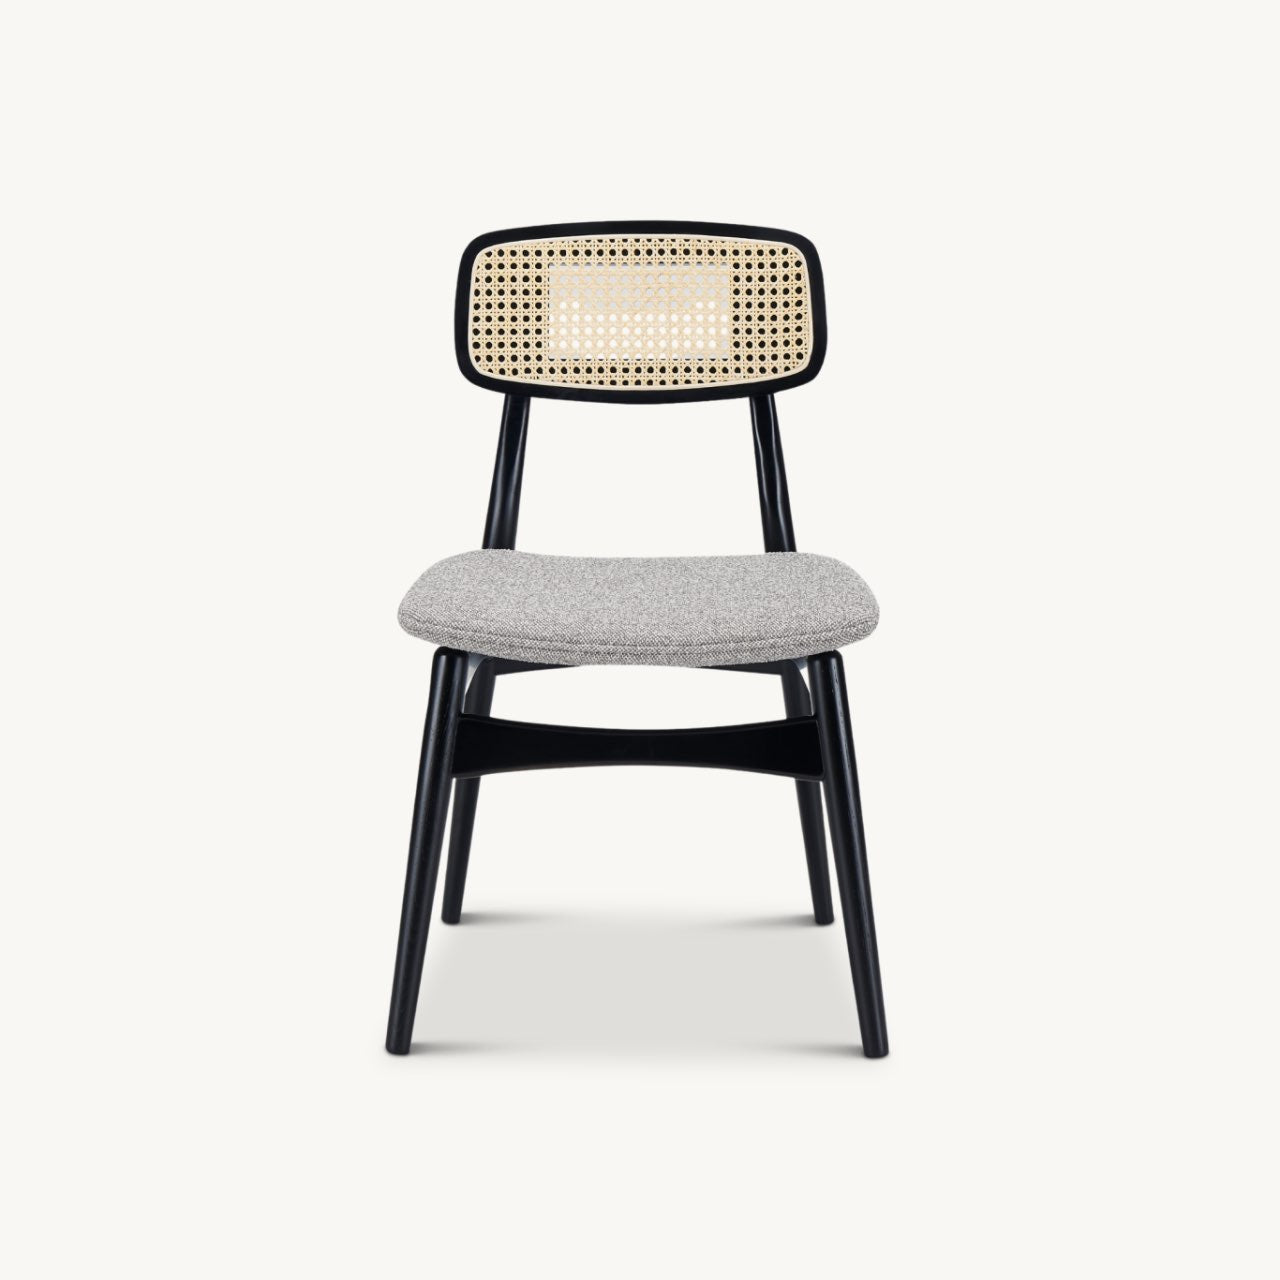 Midcentury modern design dining chair with upholstered seat and rattan back detail